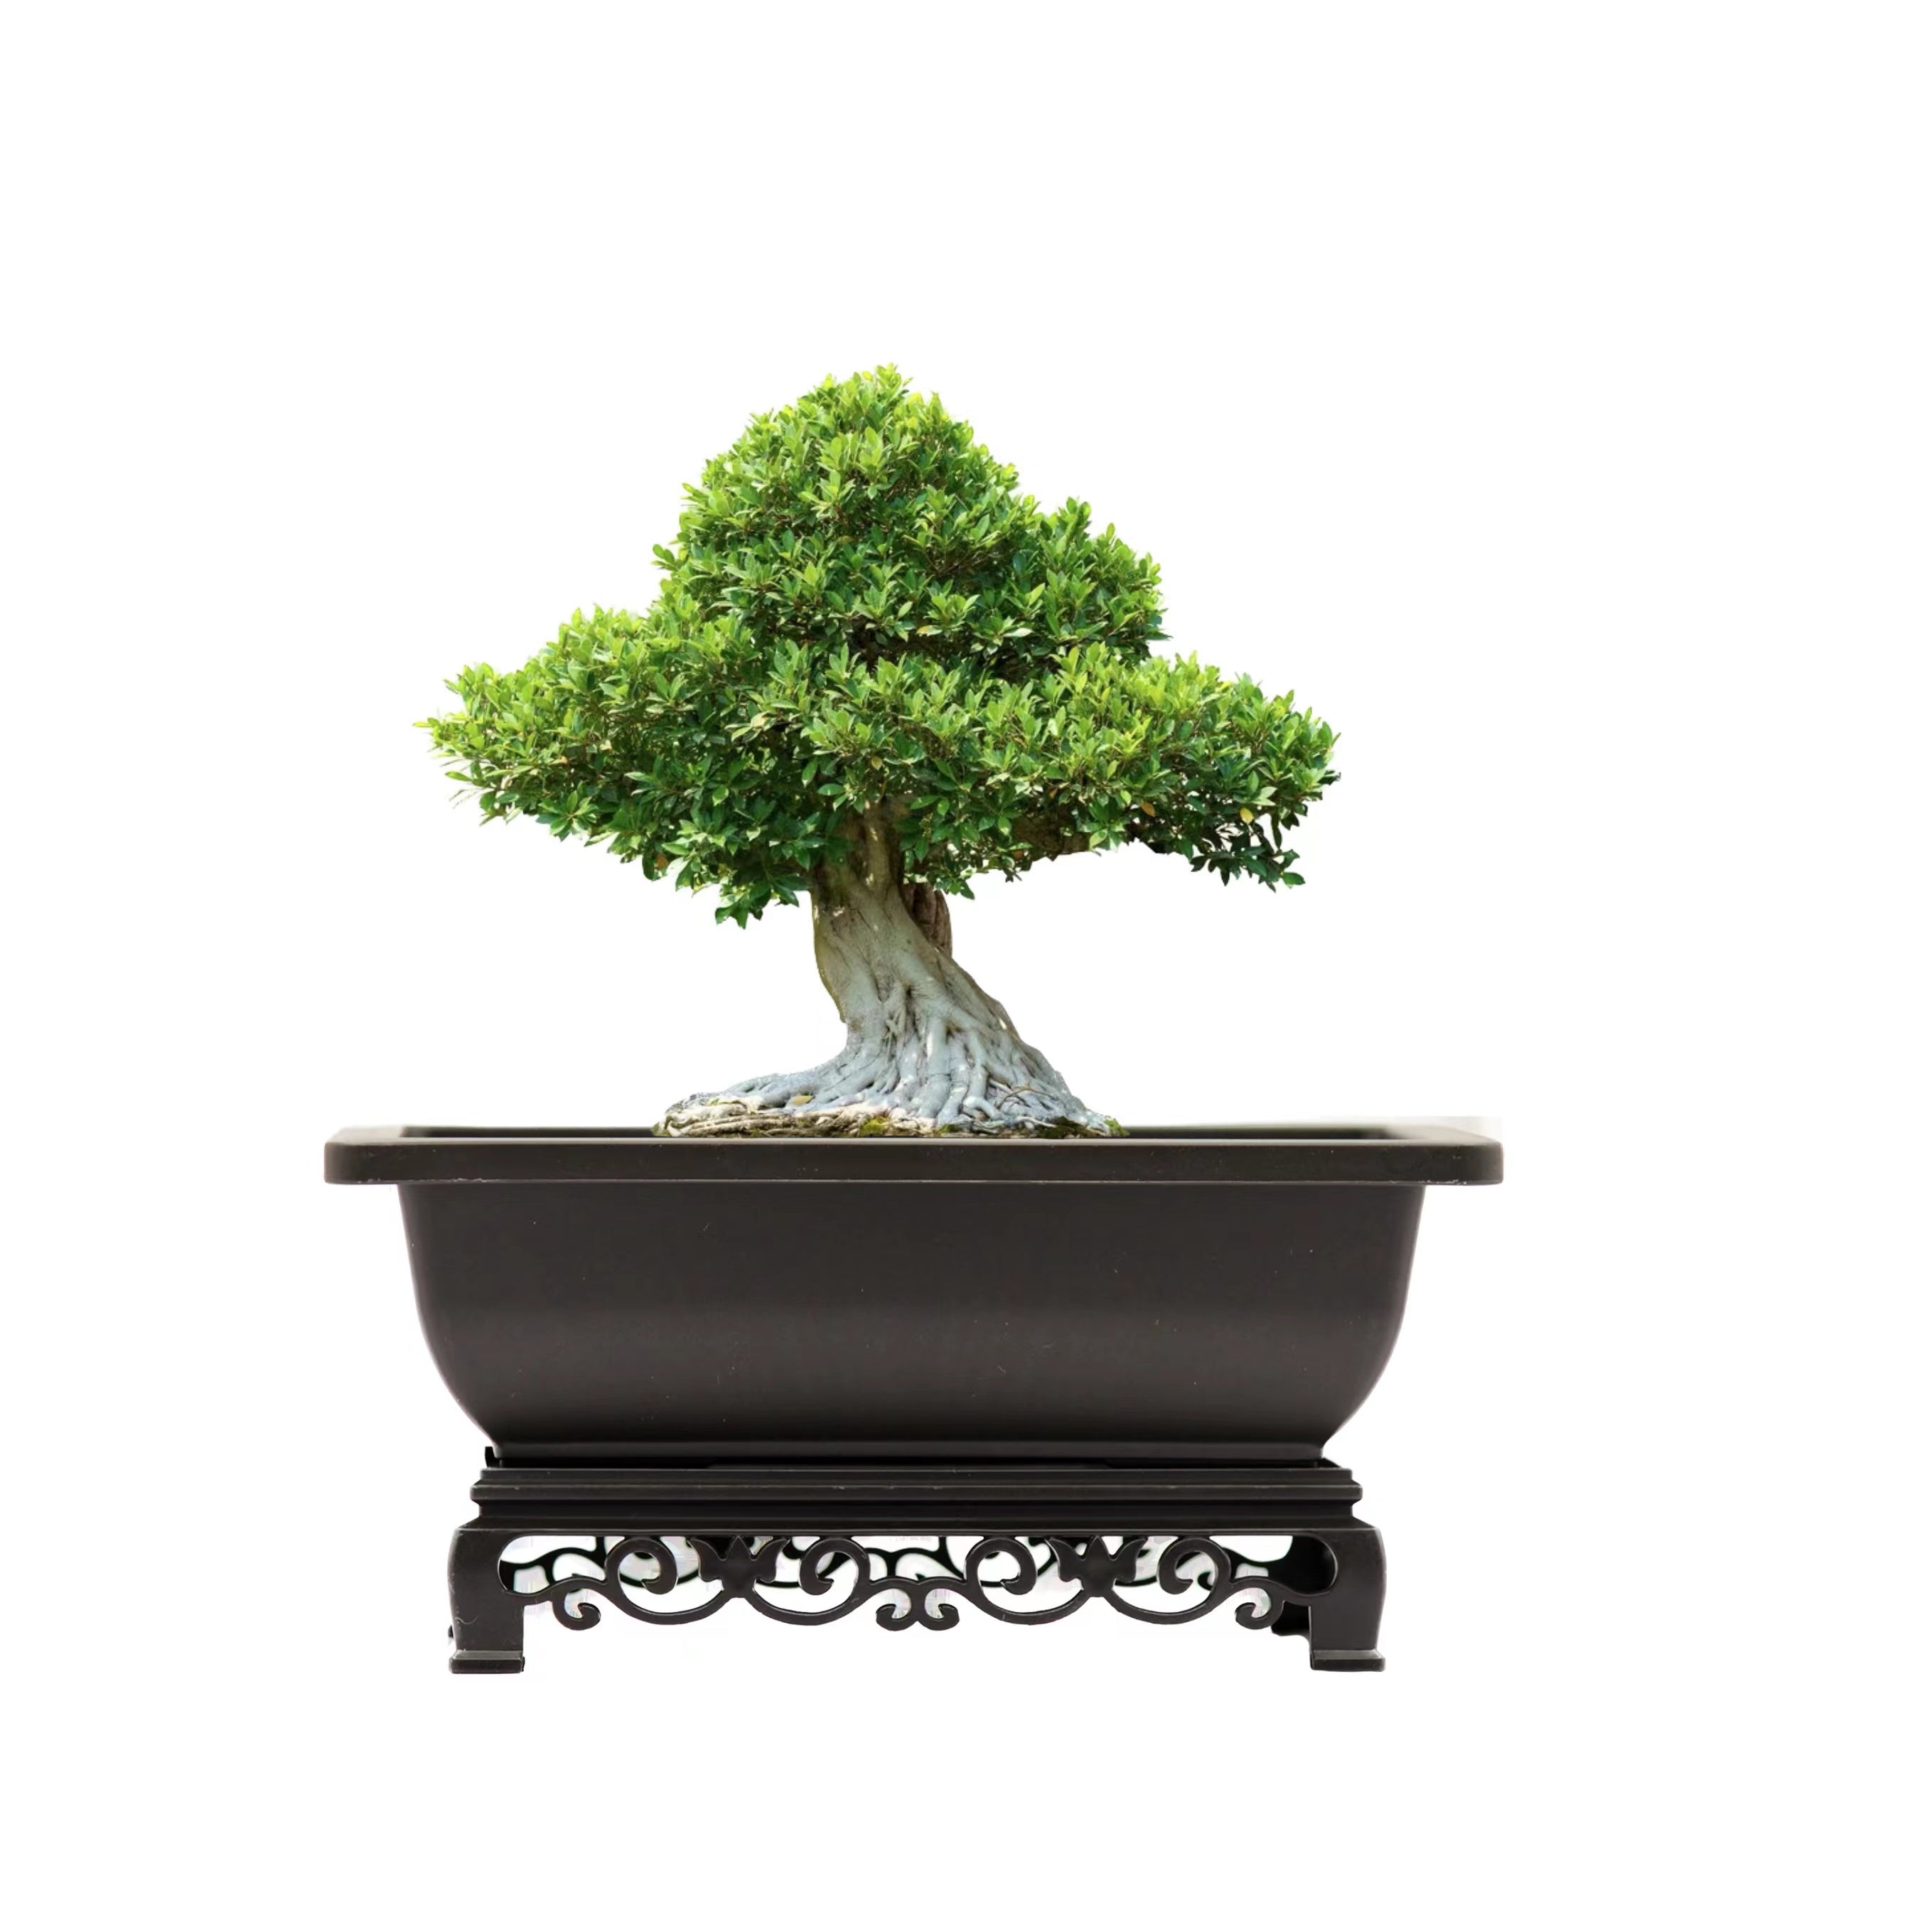 Bonsai Pot with Stand 7.5 Inch Small Bonsai Tree Training Pot Mesh Drainage Recycled Plastic